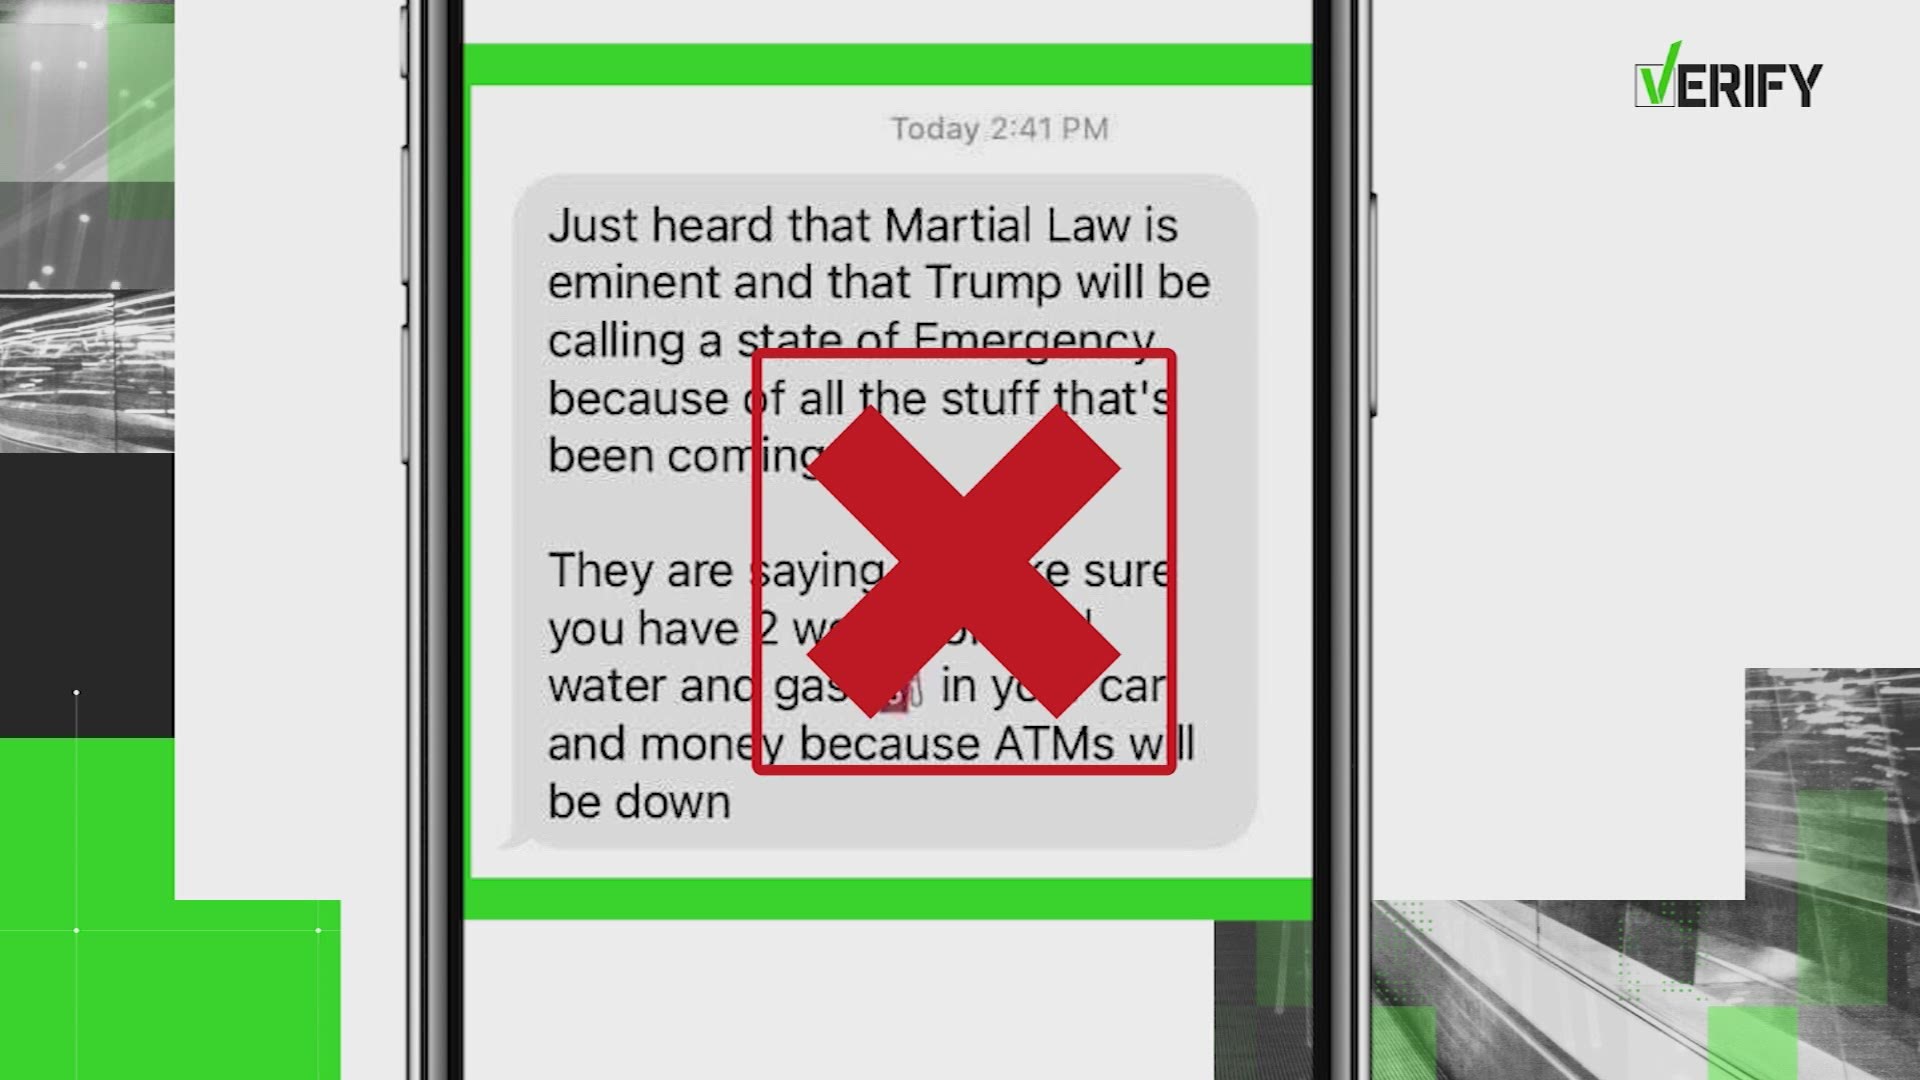 There is text messaging going around suggesting people should stock up on groceries, gas and cash before President Trump declares martial law.